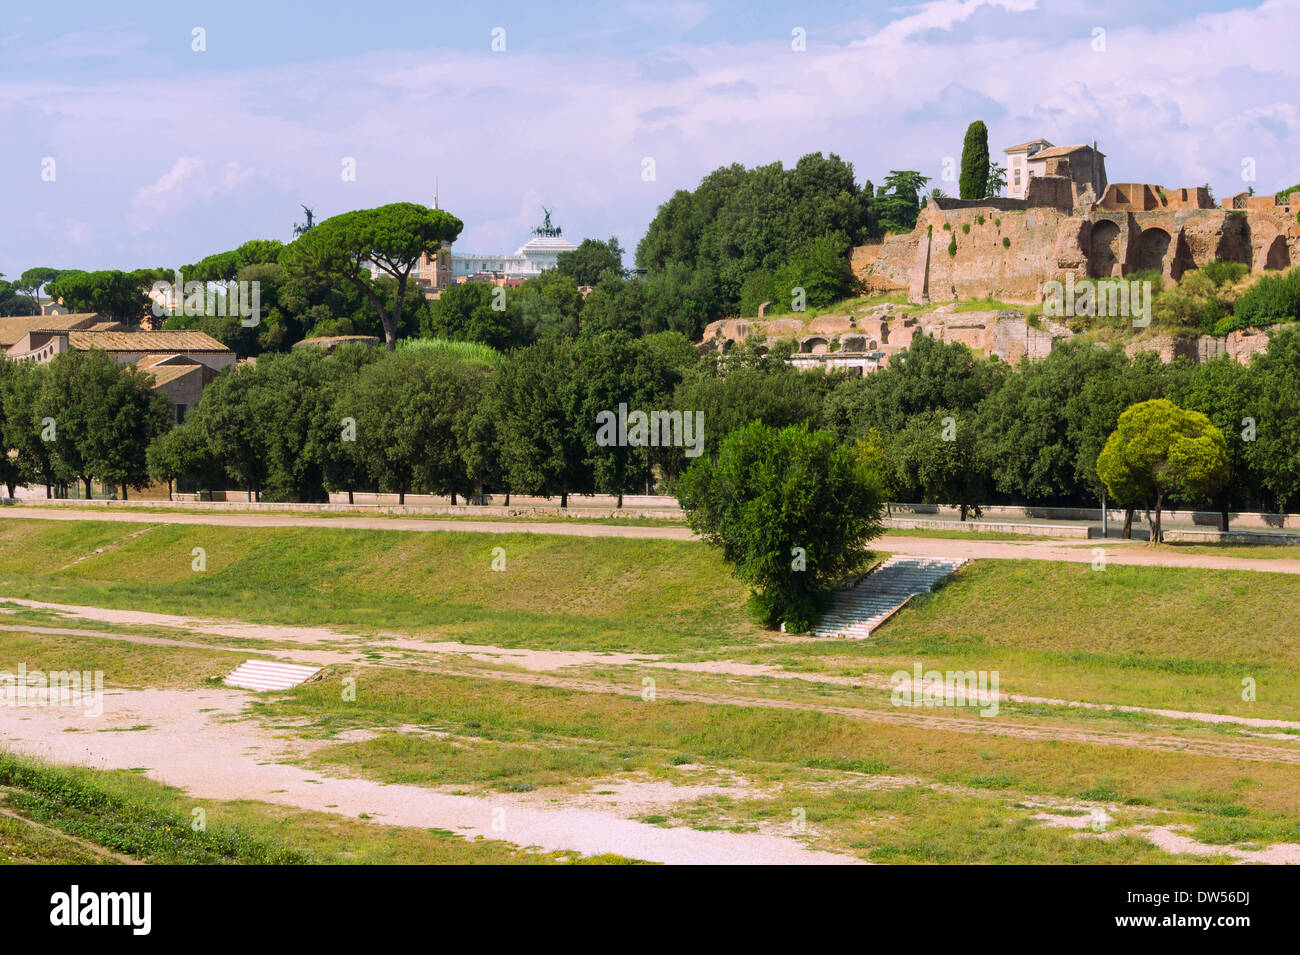 Central part of Circus Maximus, Rome, Italy. Stock Photo